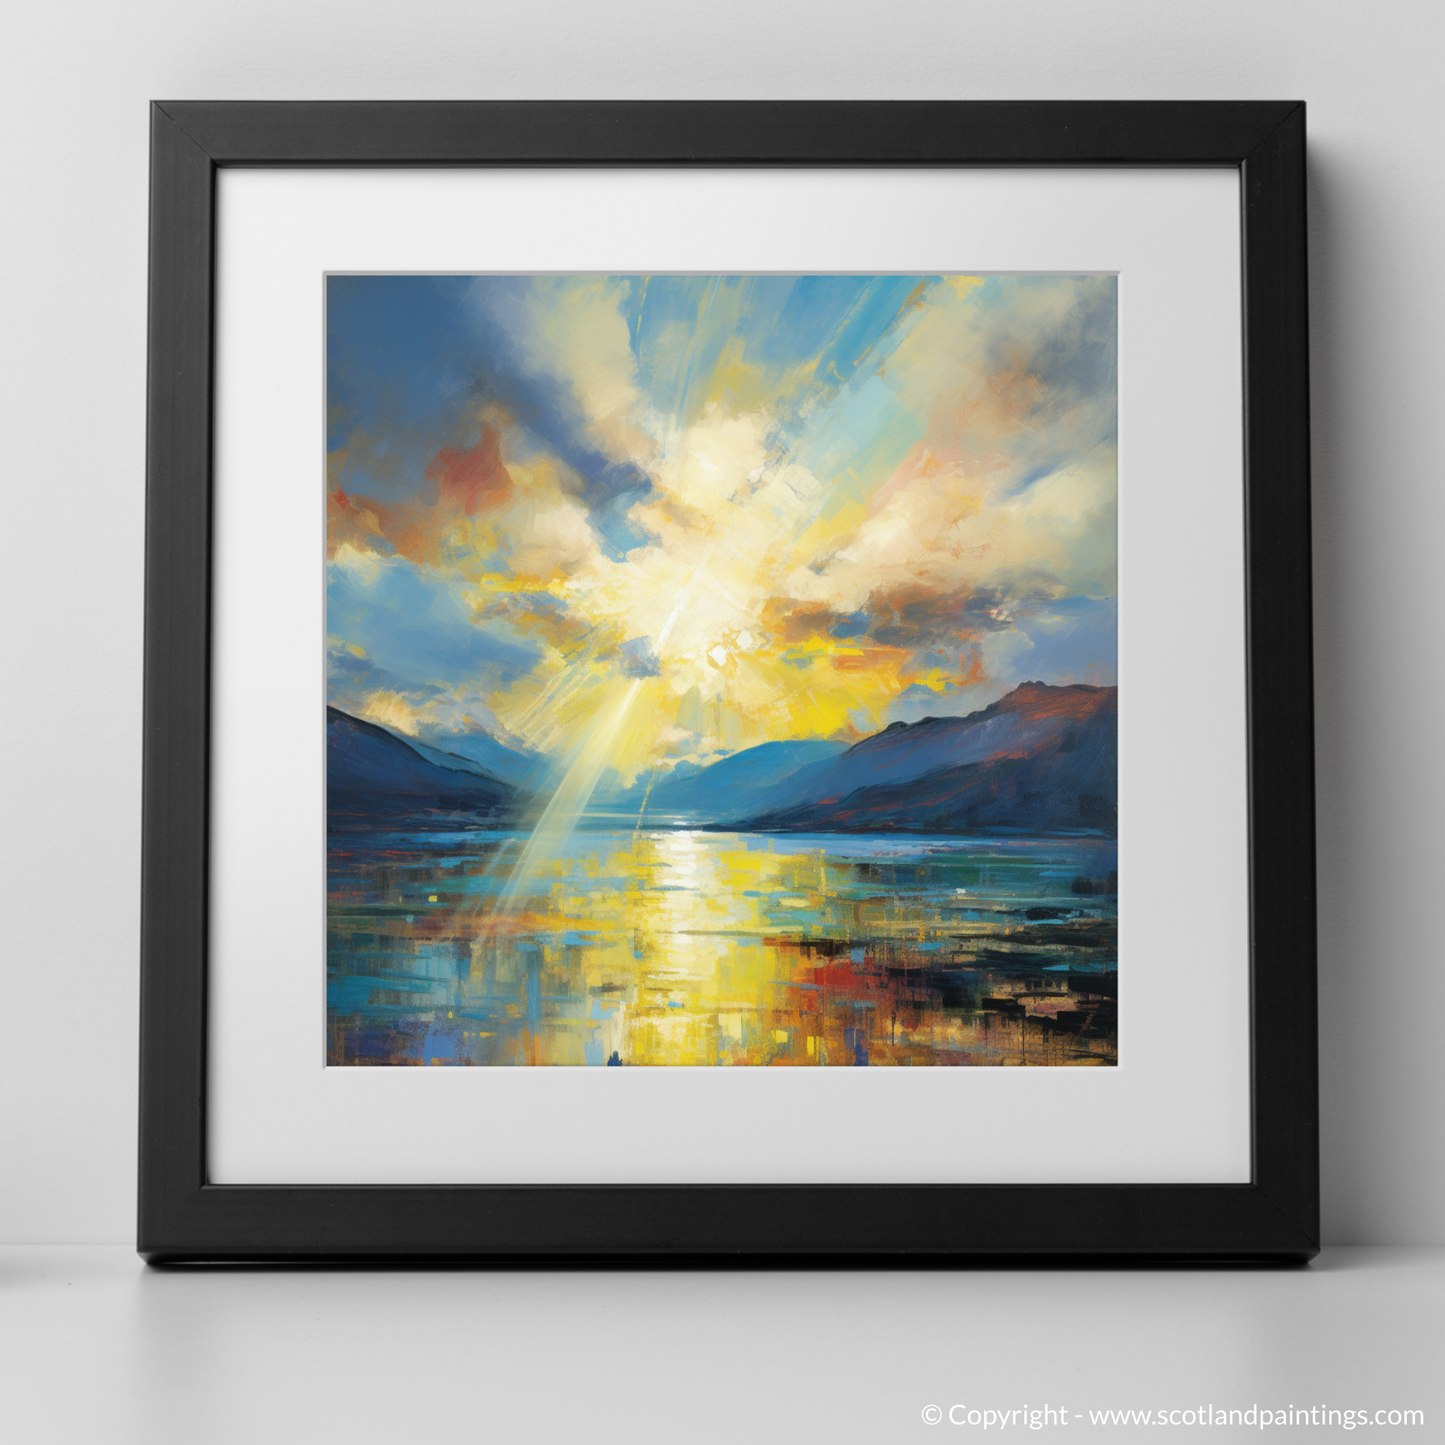 Art Print of Sun rays through clouds above Loch Lomond with a black frame